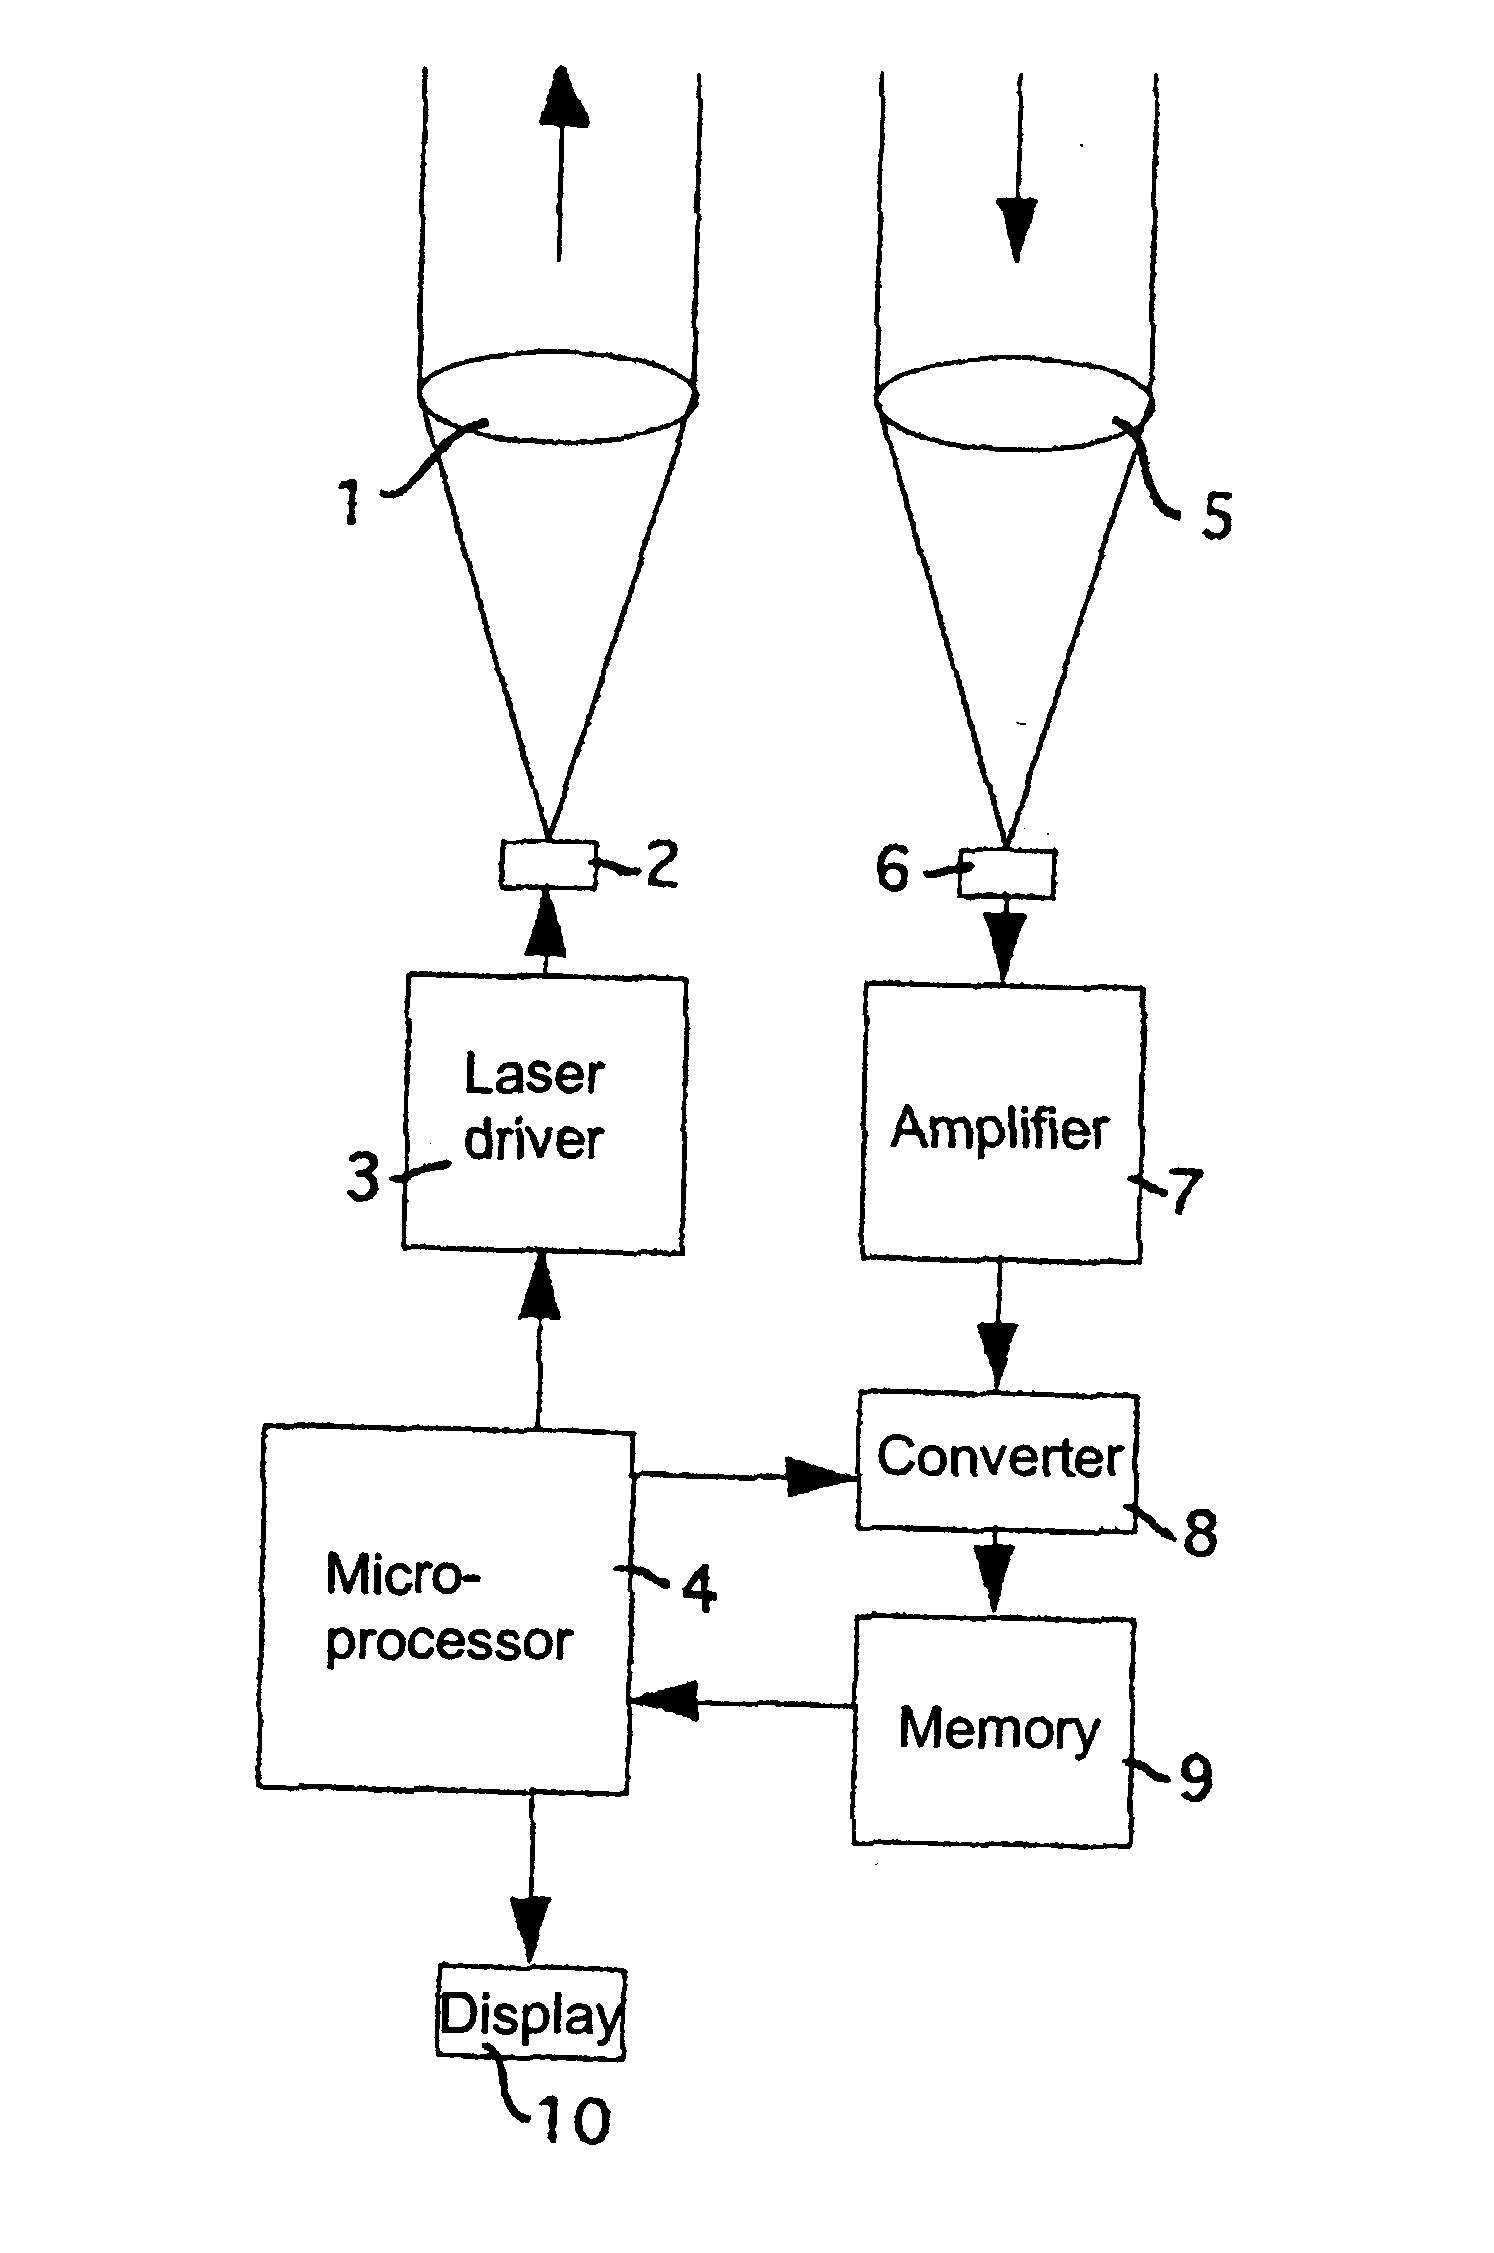 Method for optically measuring distance